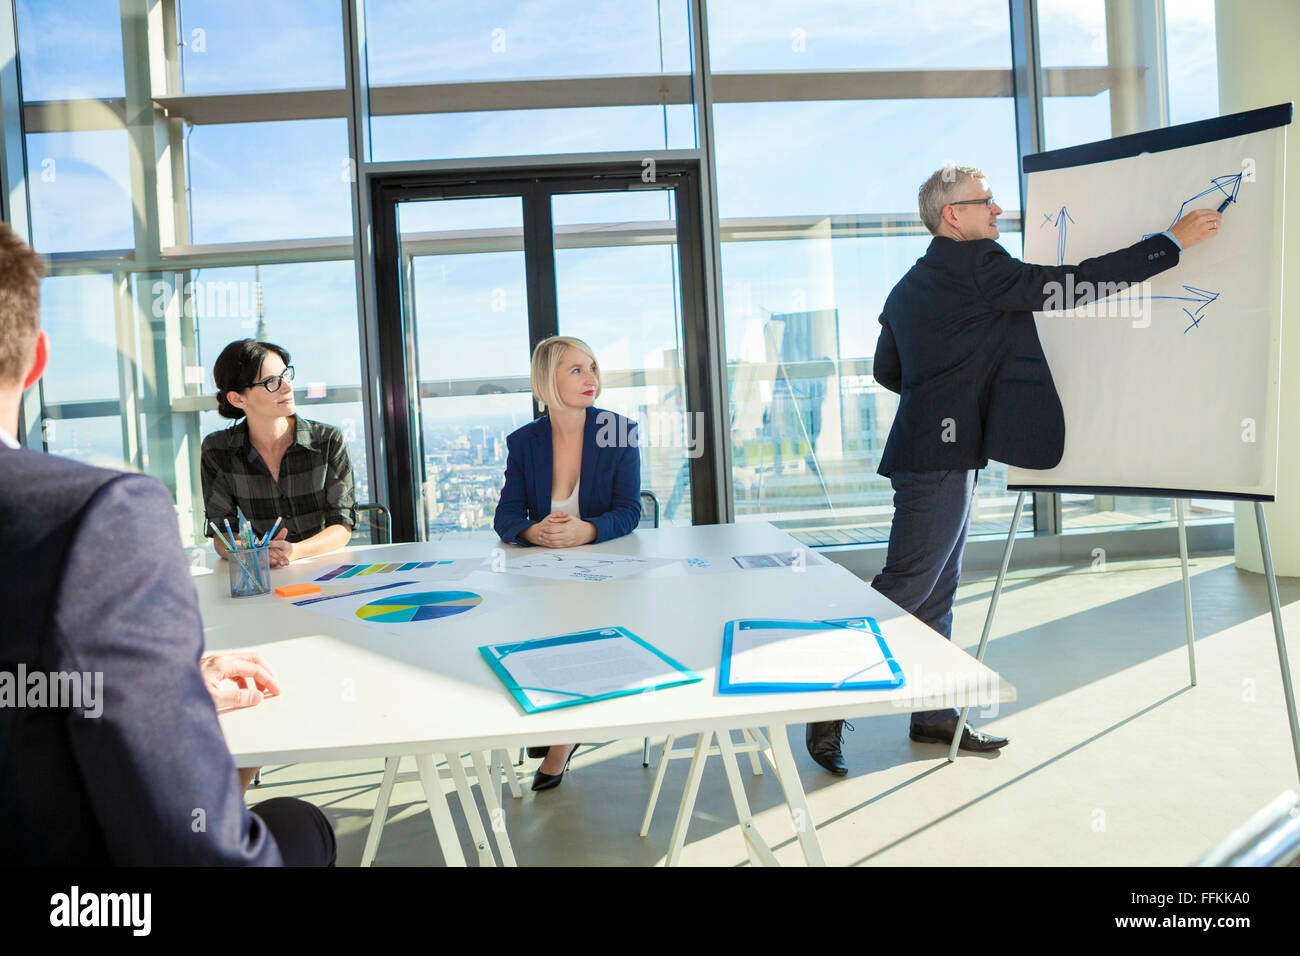 Senior architect giving presentation in business meeting Stock Photo